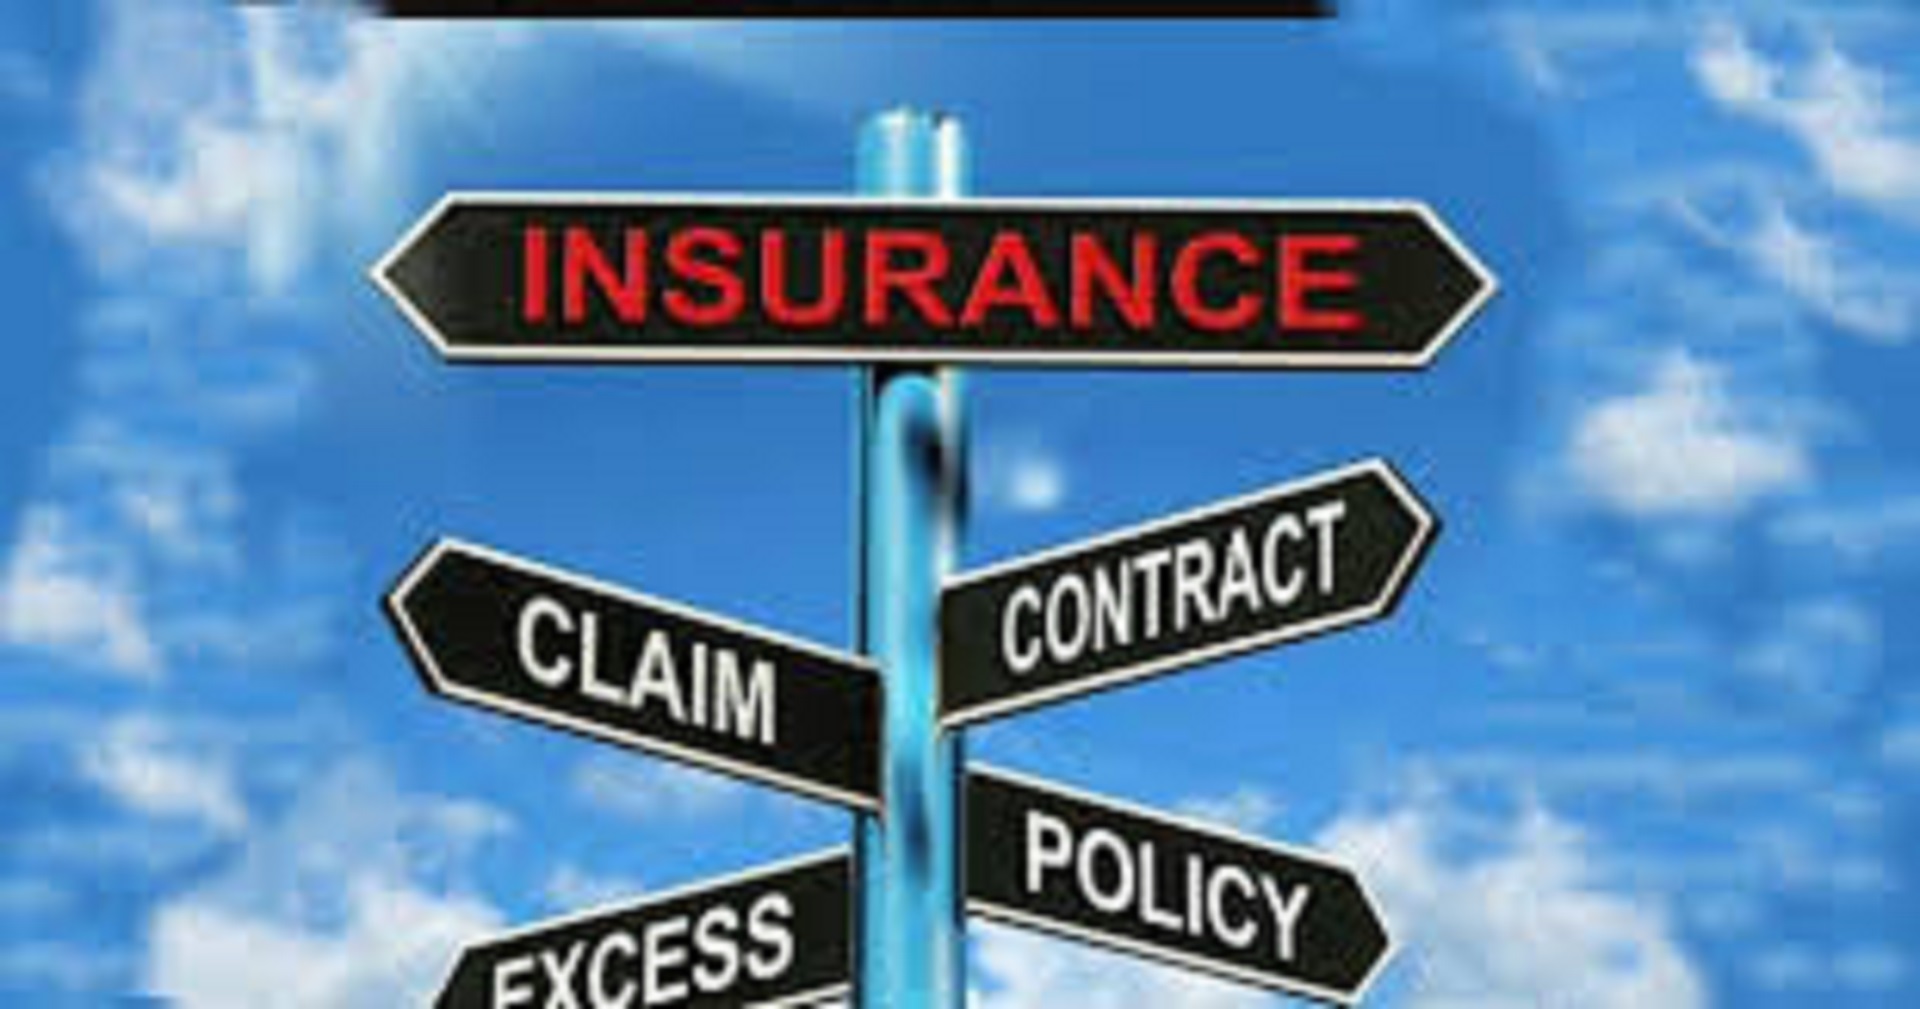 Services Insurance and Risk Management Advisory Service